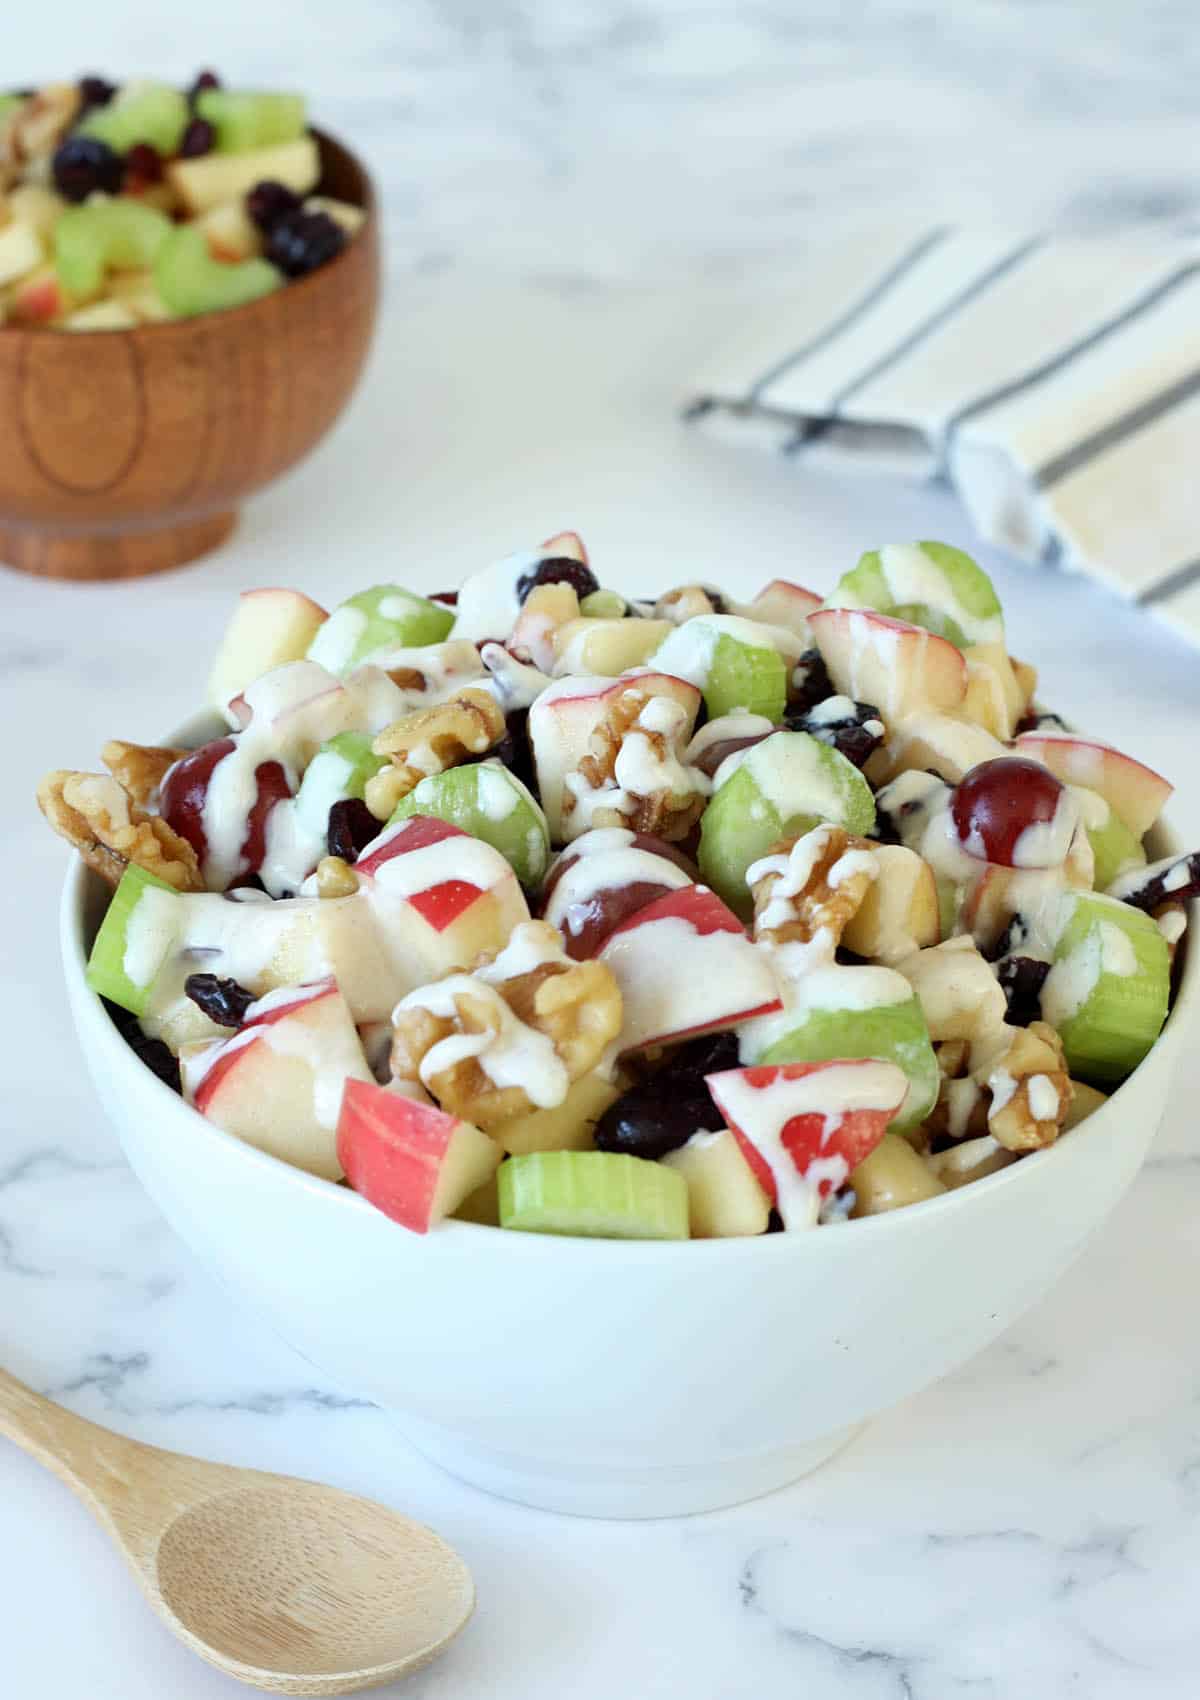 waldorf salad with apples, celery and grapes drizzled with dressing in a white serving bowl